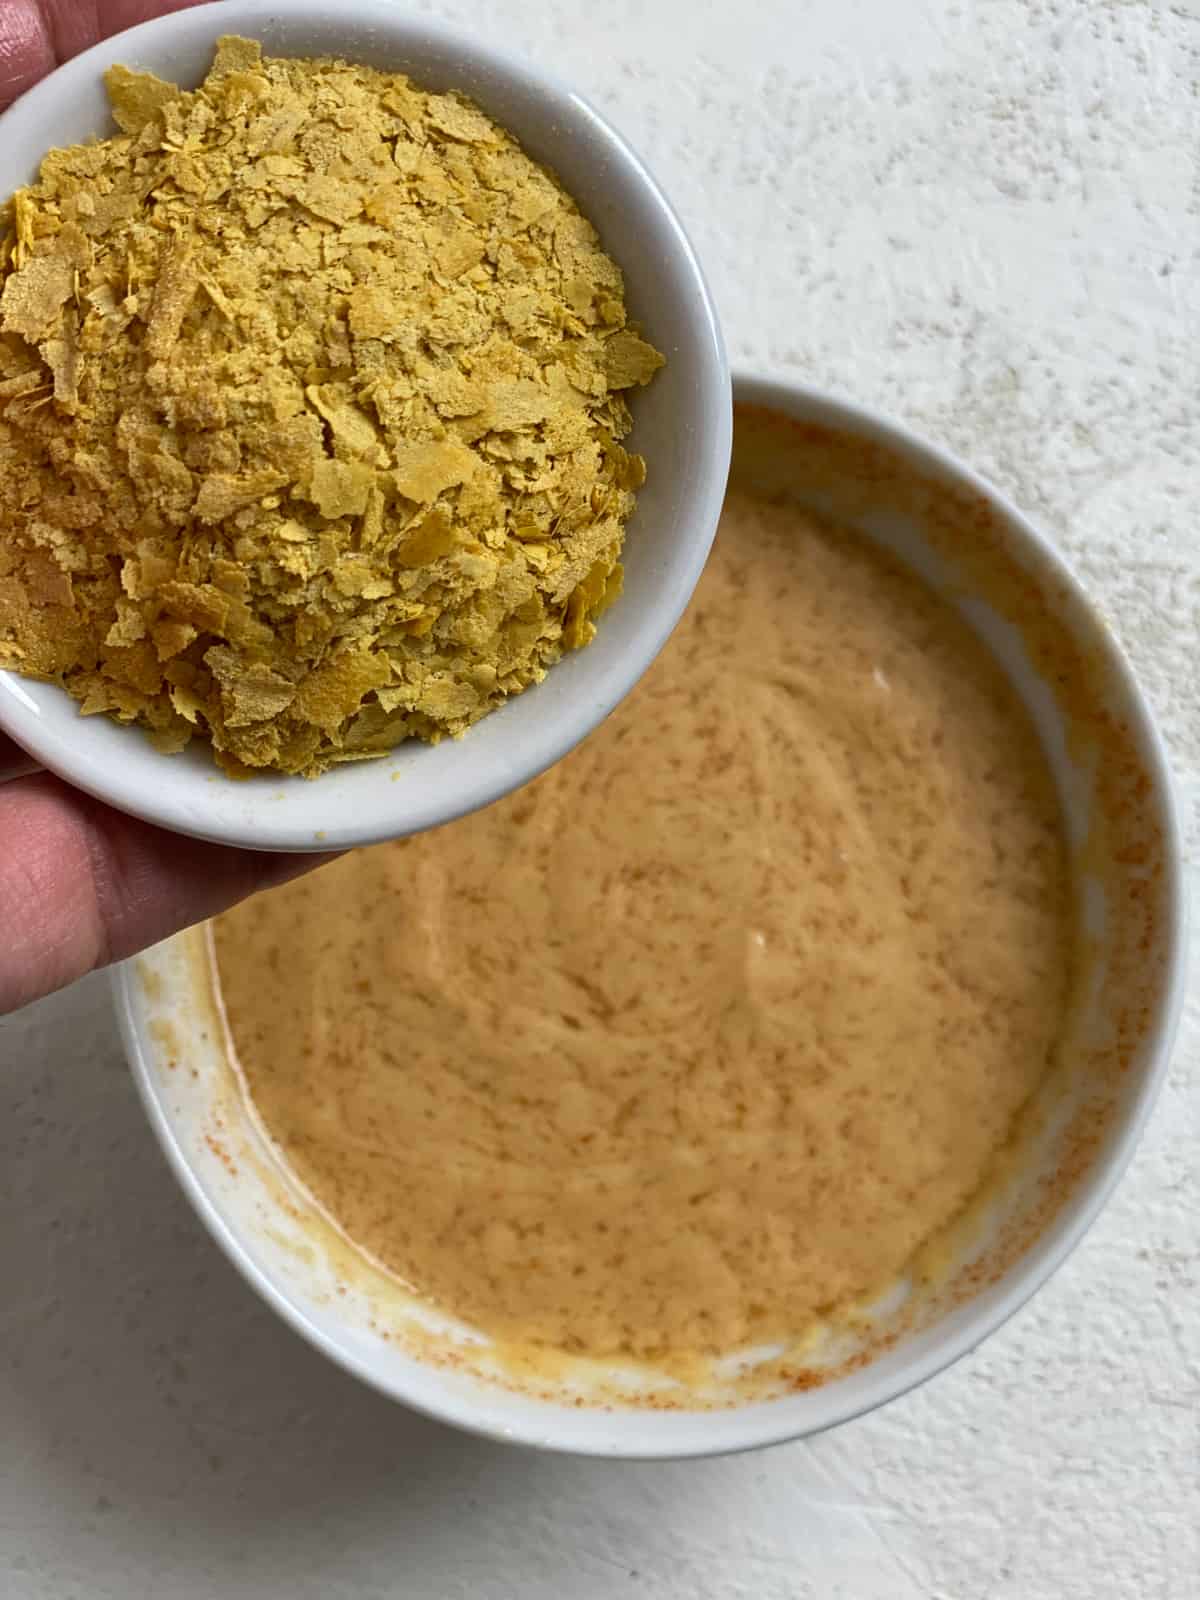 process shot of adding nutritional yeast to sauce mixture in bowl